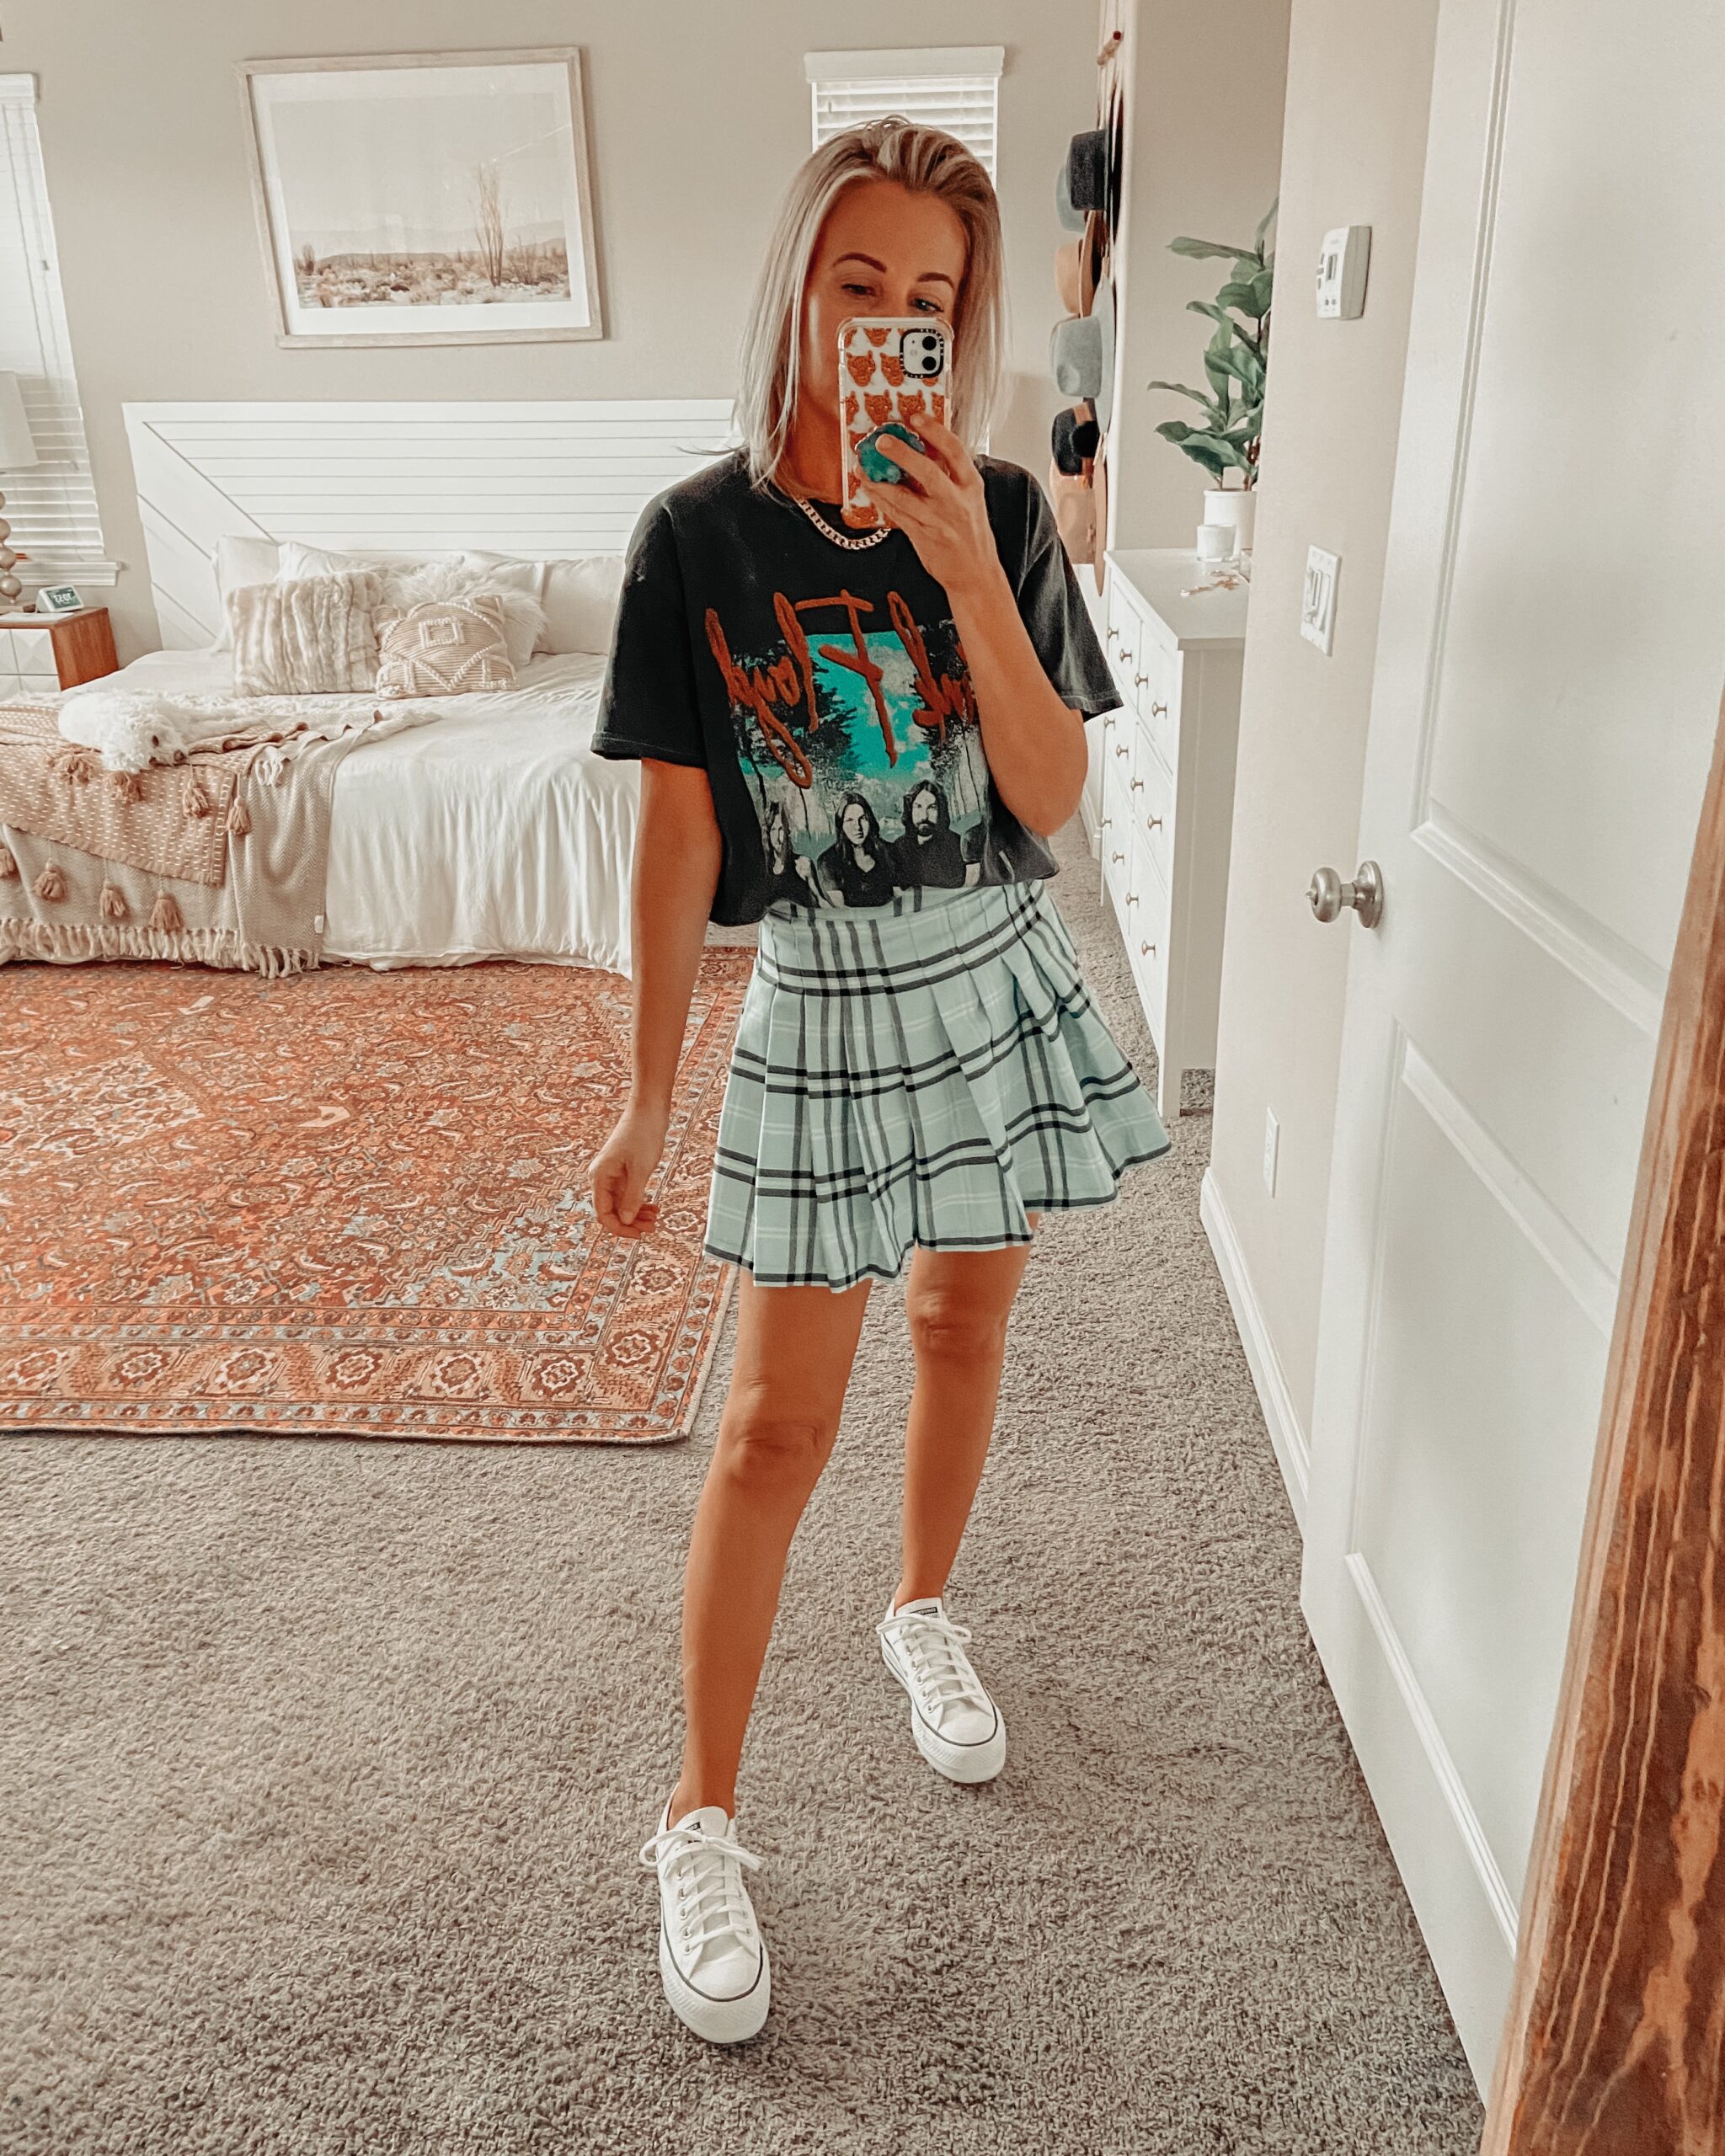 CRUSHING ON TENNIS SKIRTS- Jaclyn De Leon Style + Tennis skirts are the latest Spring trend + I'm sharing a few easy ways to style this look